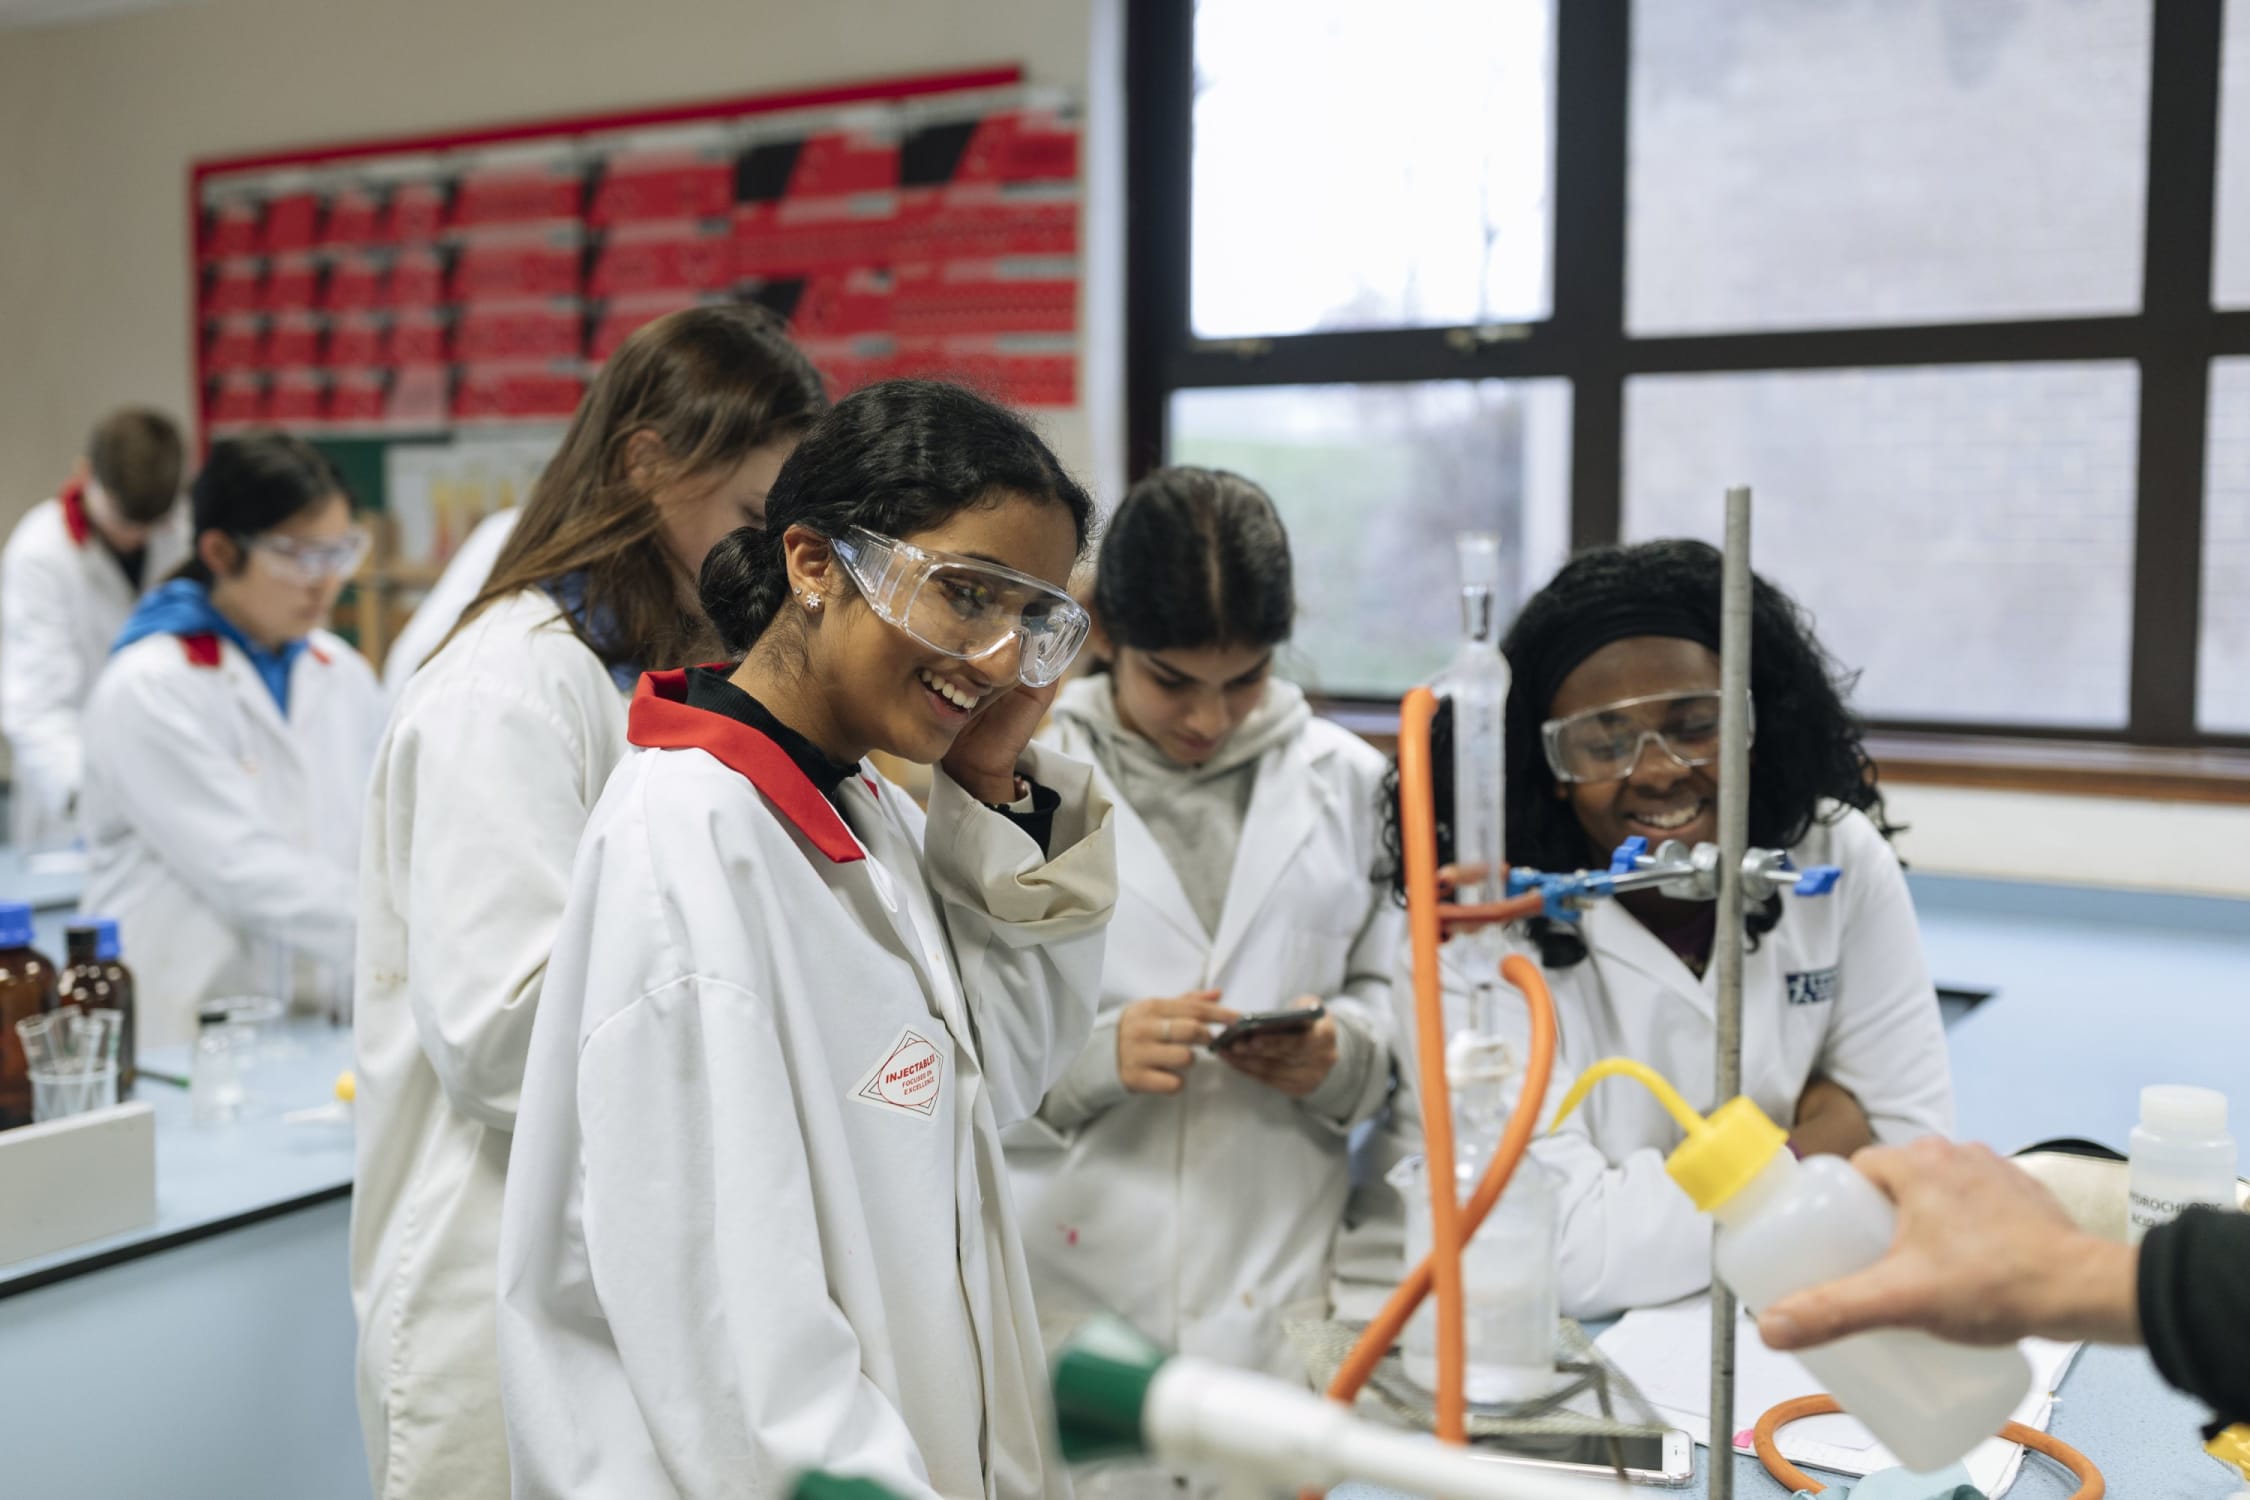 Two girls in a classroom, smiling, wearing white lab coats and goggles, conducting an experiment